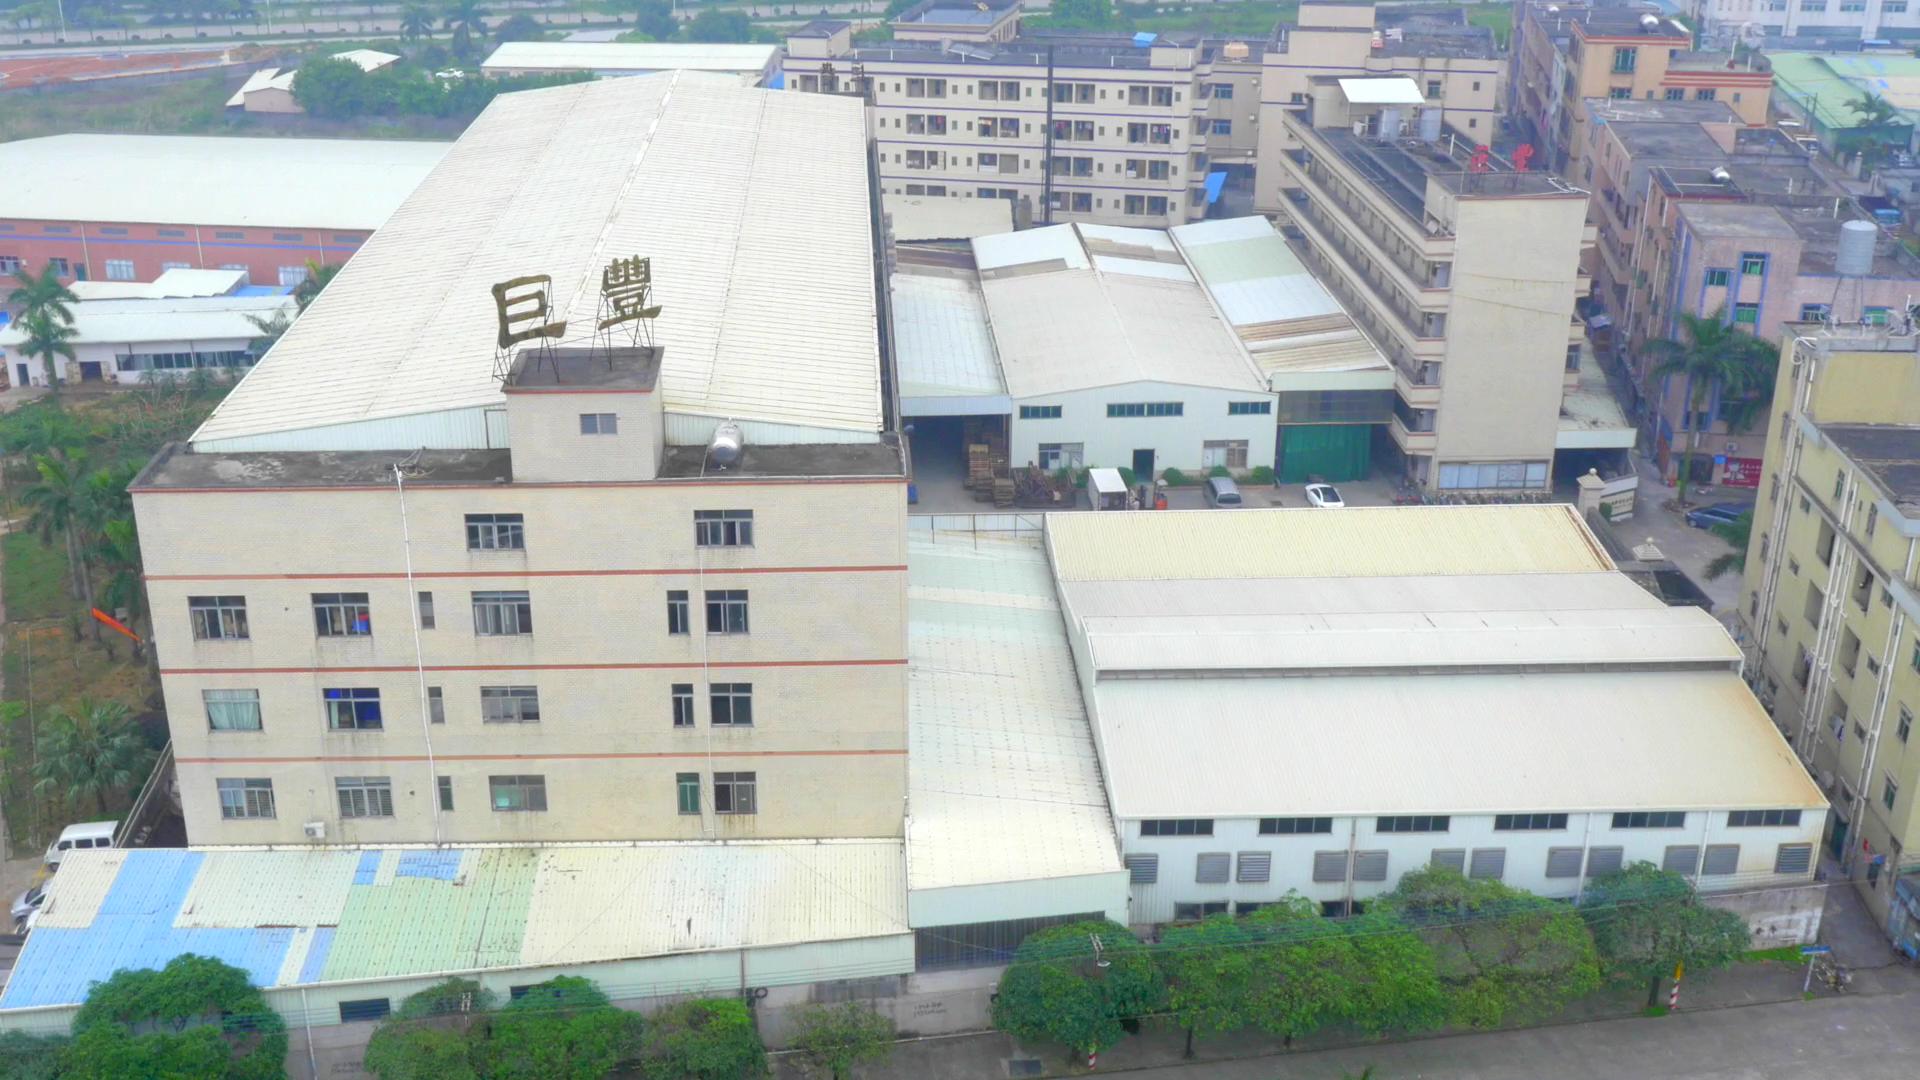   Ju Feng Metal Plastic Co.,Ltd was founded in 1997